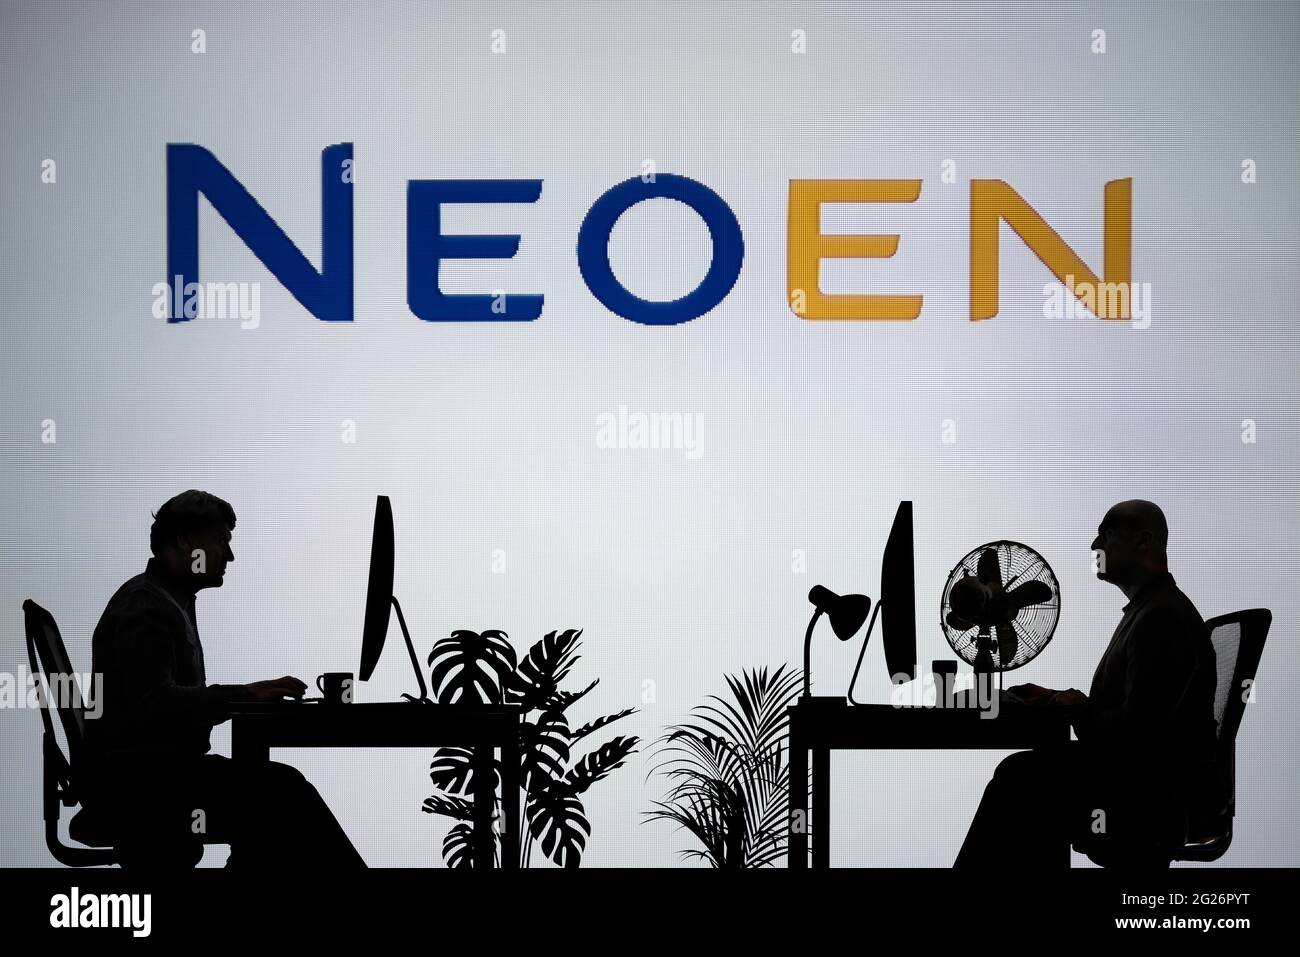 The Neoen logo is seen on an LED screen in the background while two silhouetted people work in an office environment (Editorial use only) Stock Photo